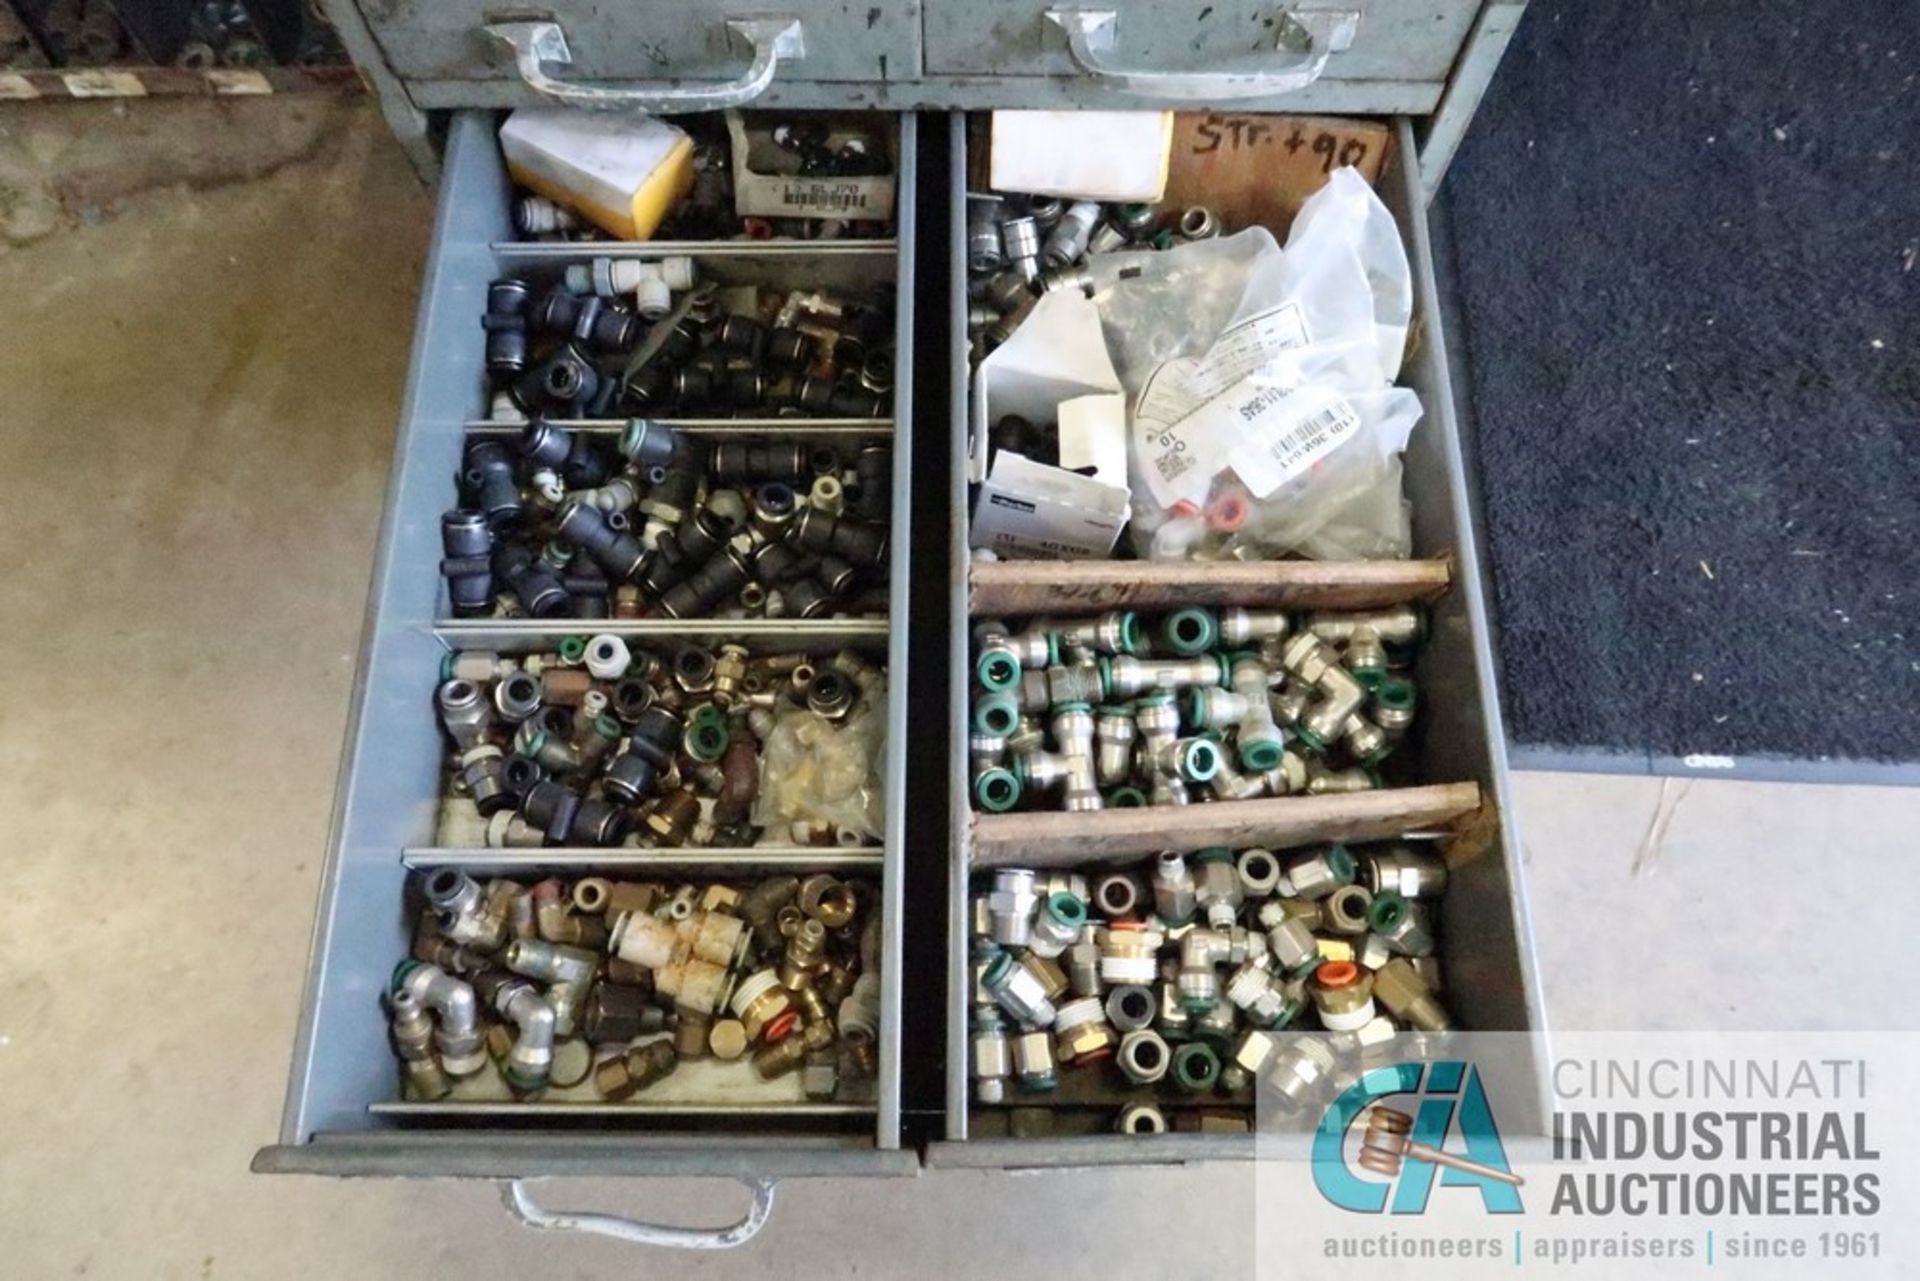 (LOT) MISCELLANEOUS ELECTRICAL, PNEUMATIC, AND MACHINE COMPONENTS WITH CABINETS - Image 9 of 15